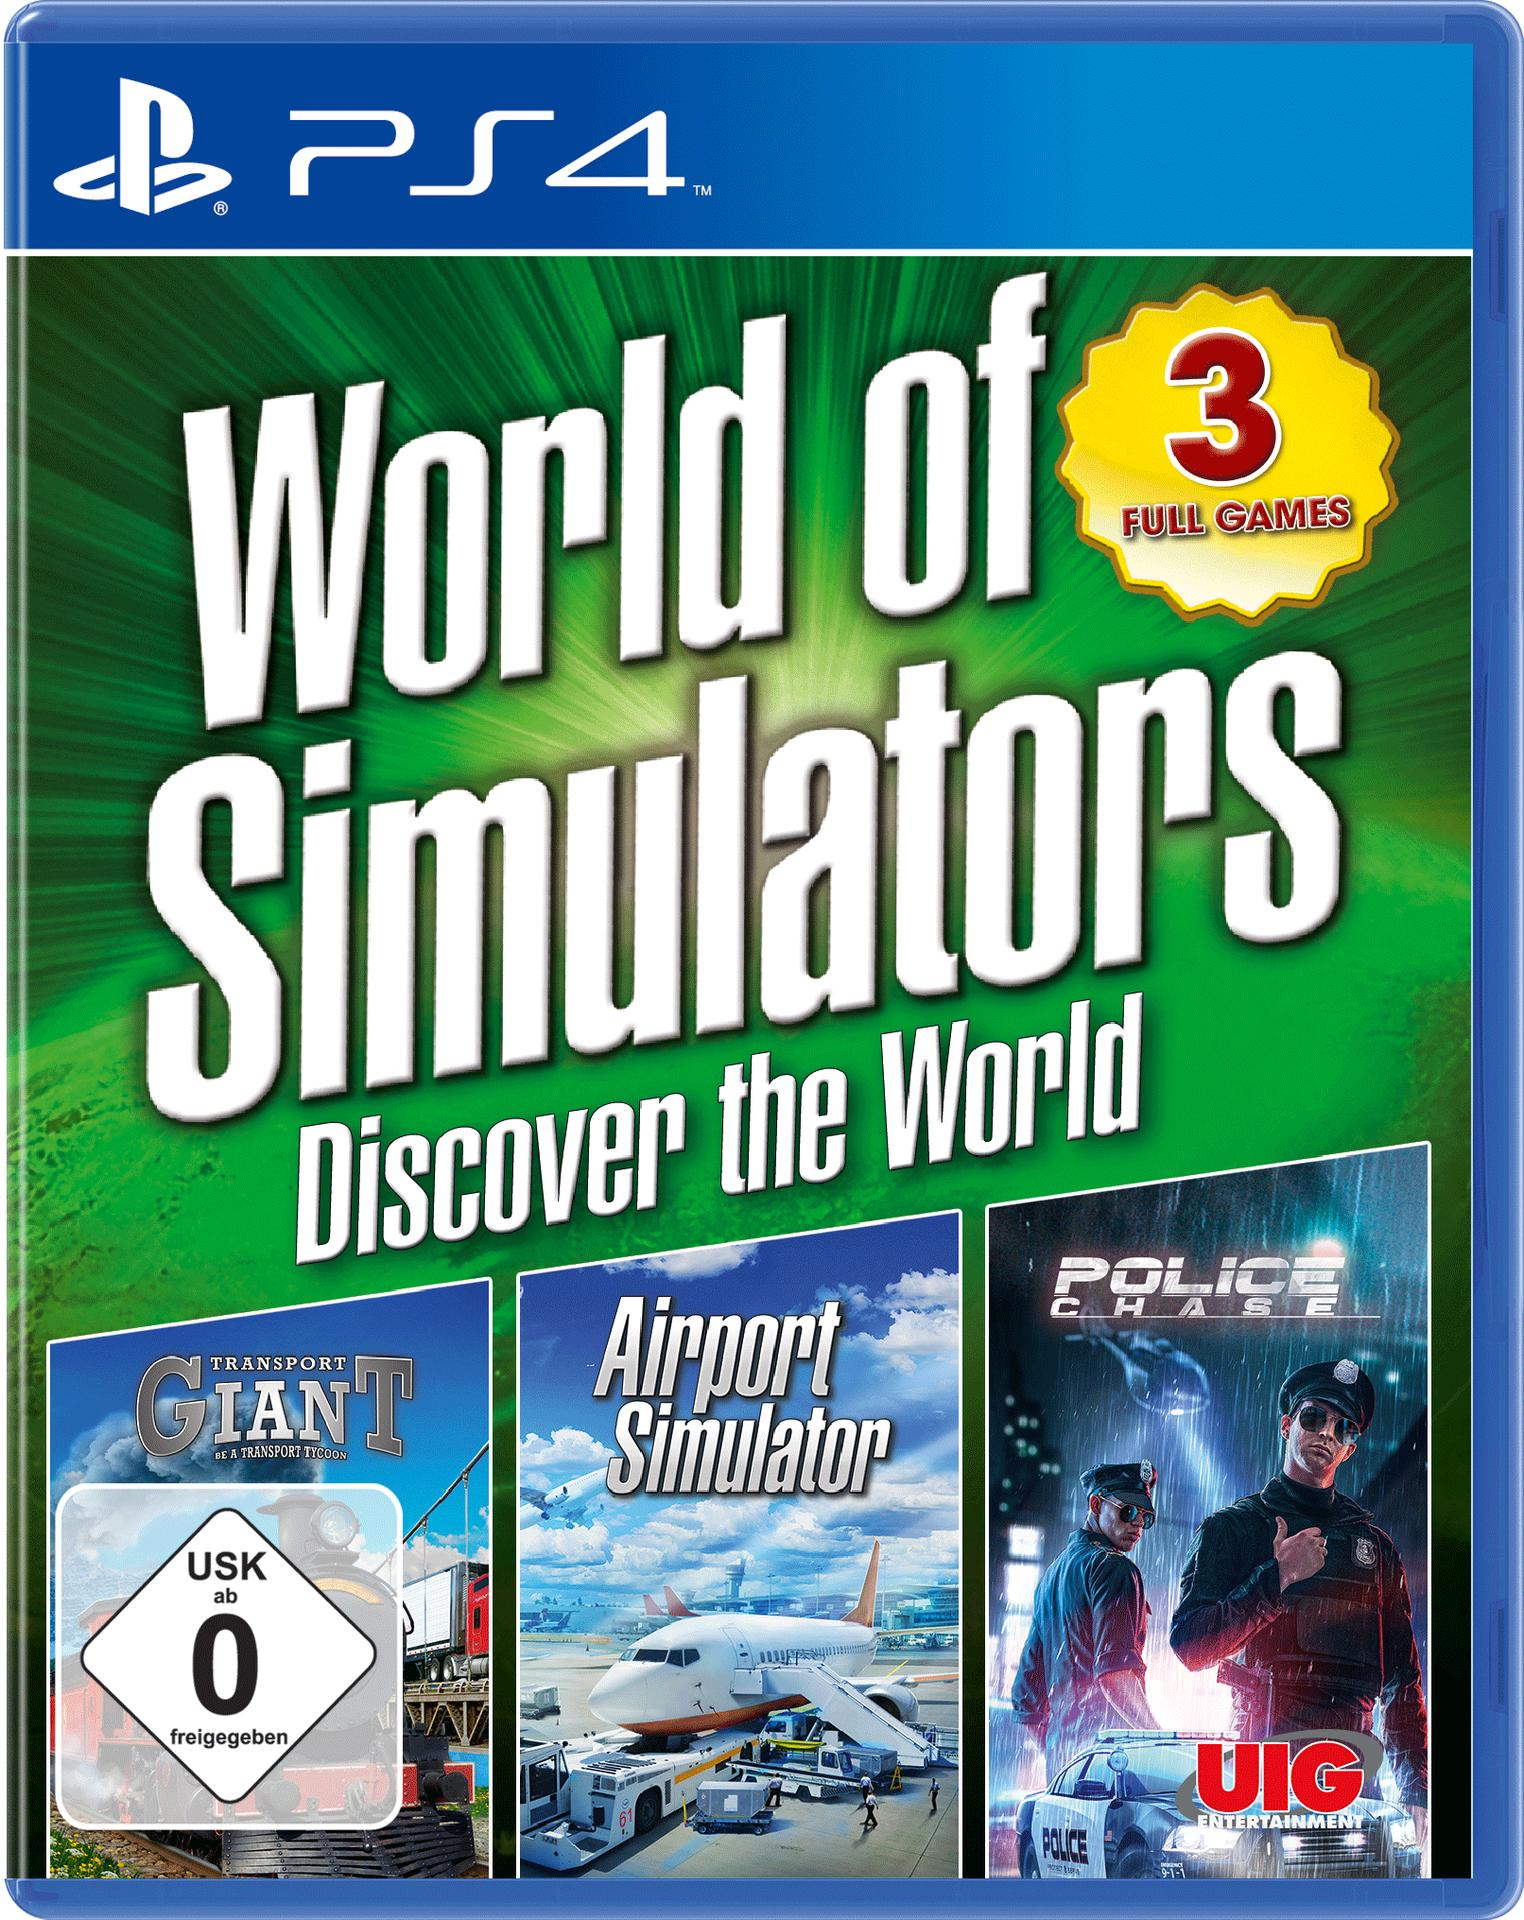 of Simulators: 4] World [PlayStation Discover - World the